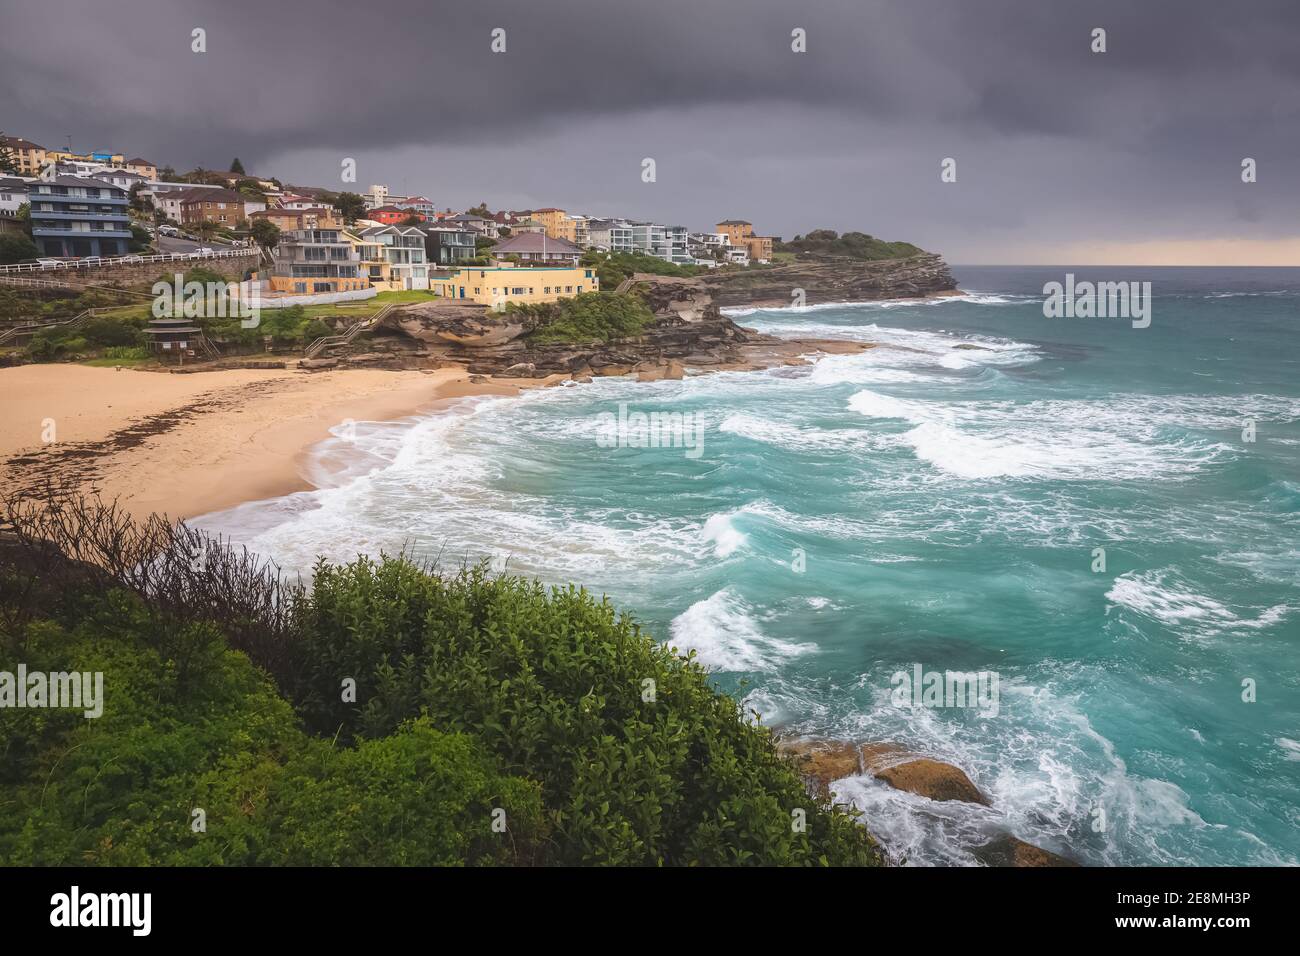 View over Tamarama Beach bay against a moody, stormy sky with whitecaps on a summer day along the Bondi to Bronte coastal walk in Sydney, NSW. Stock Photo